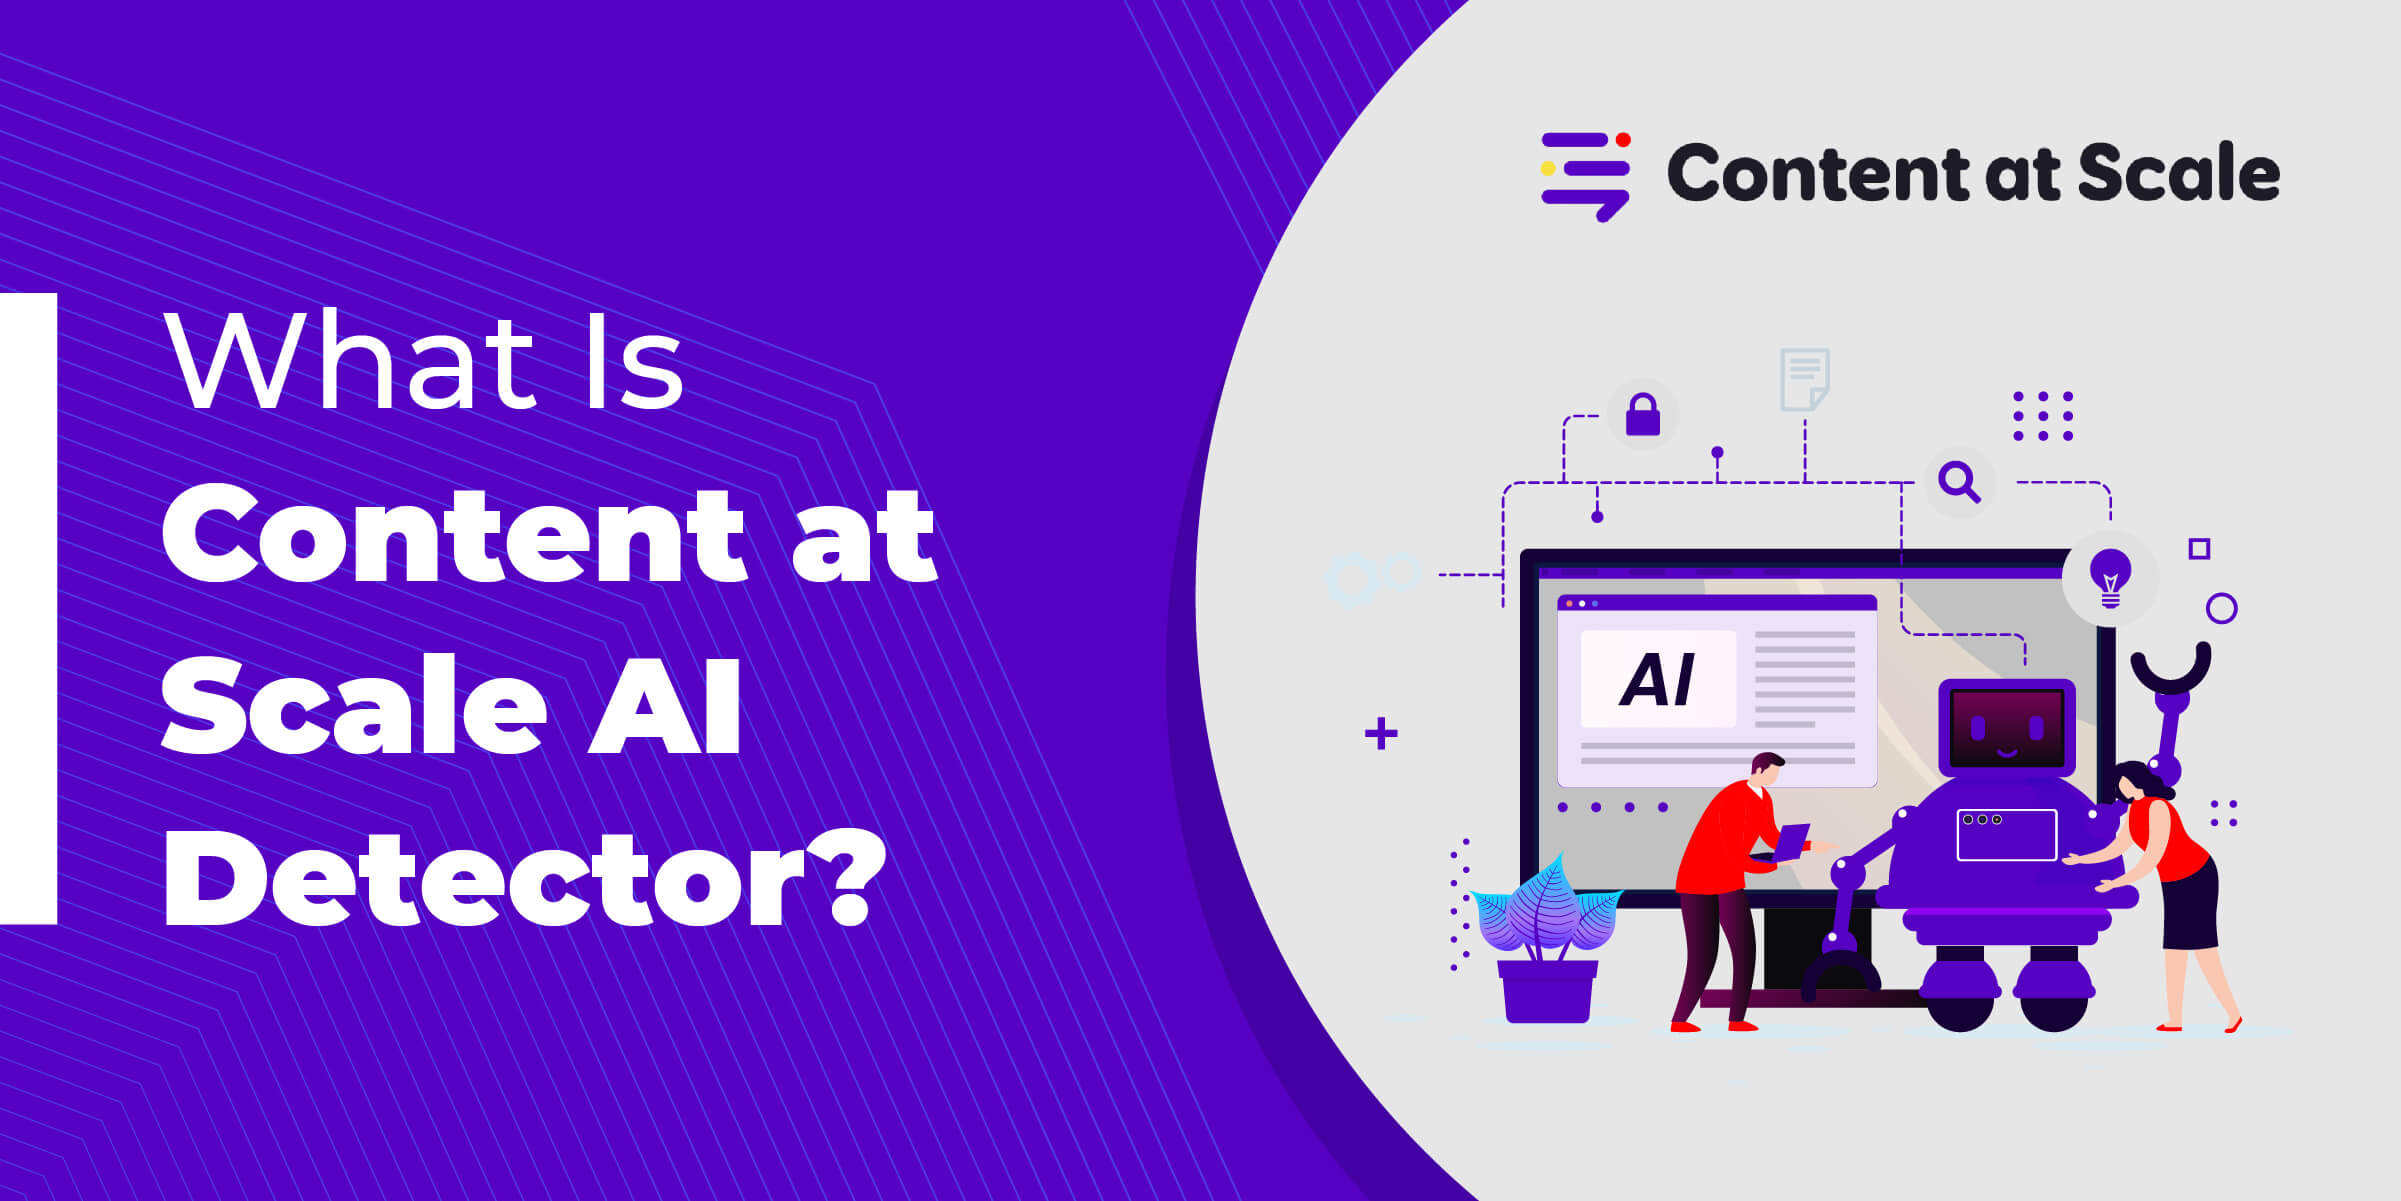 What Is Content at Scale AI Detector